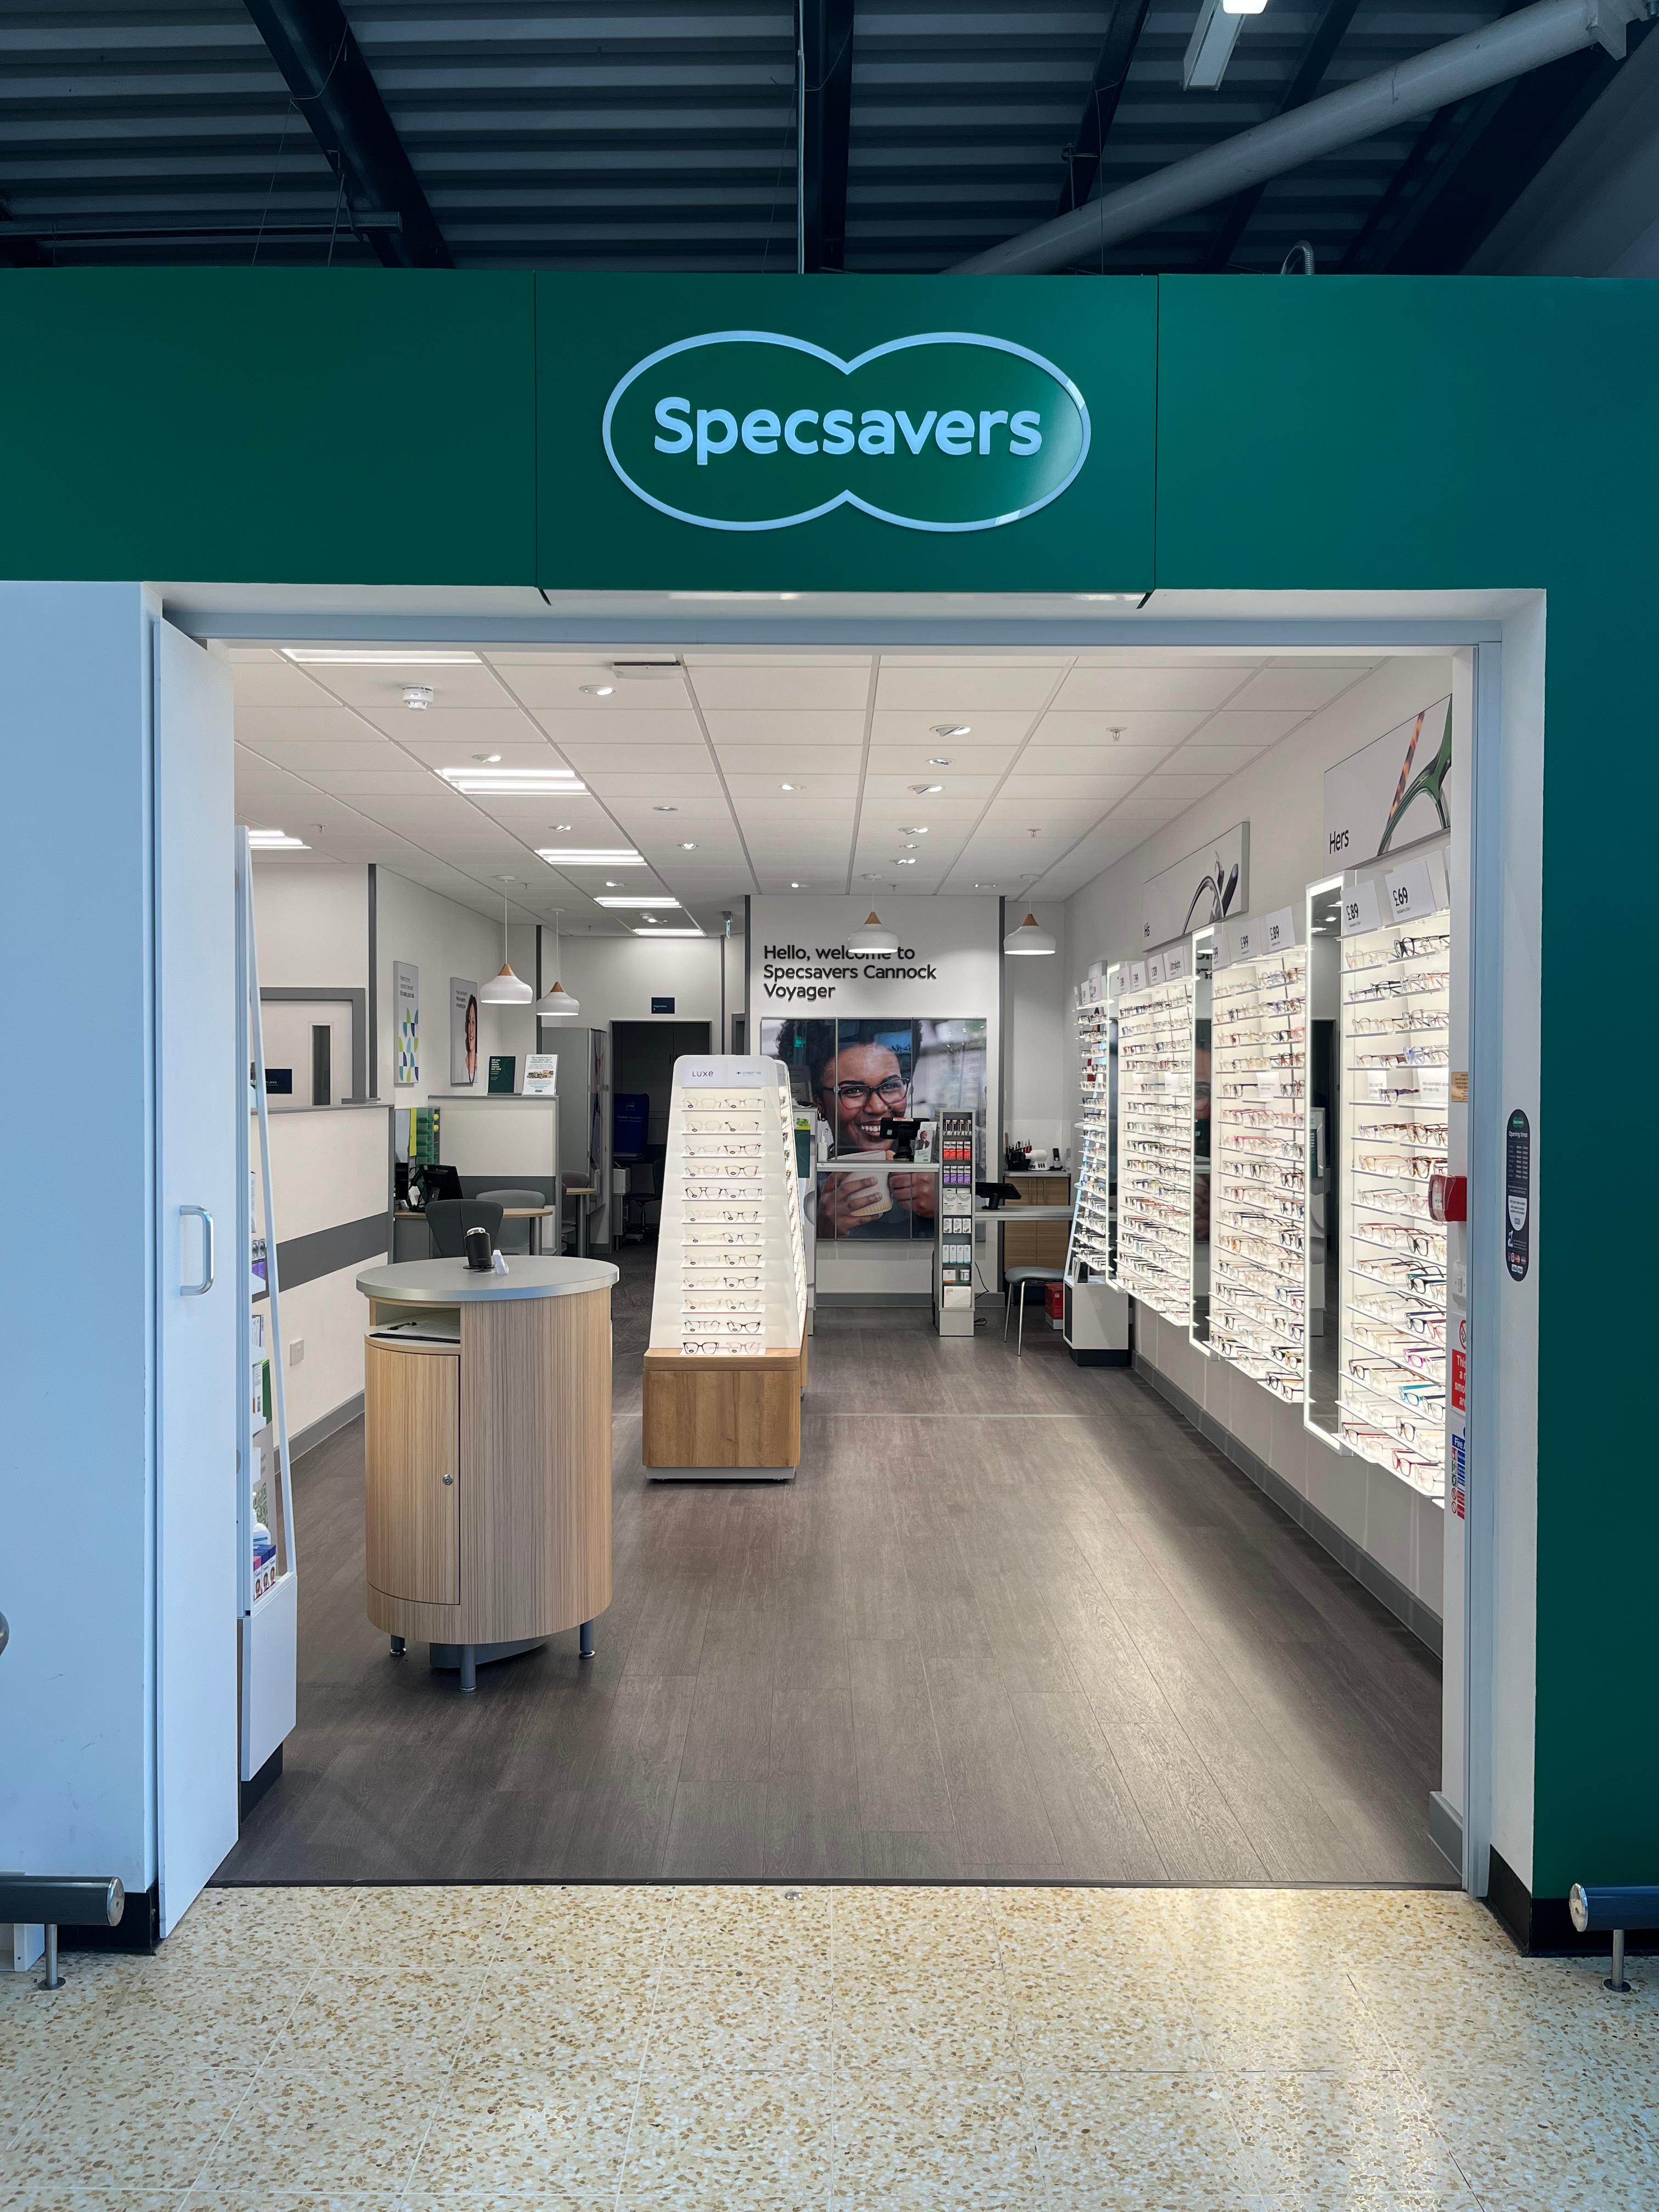 Images Specsavers Opticians and Audiologists - Cannock Voyager Sainsbury's